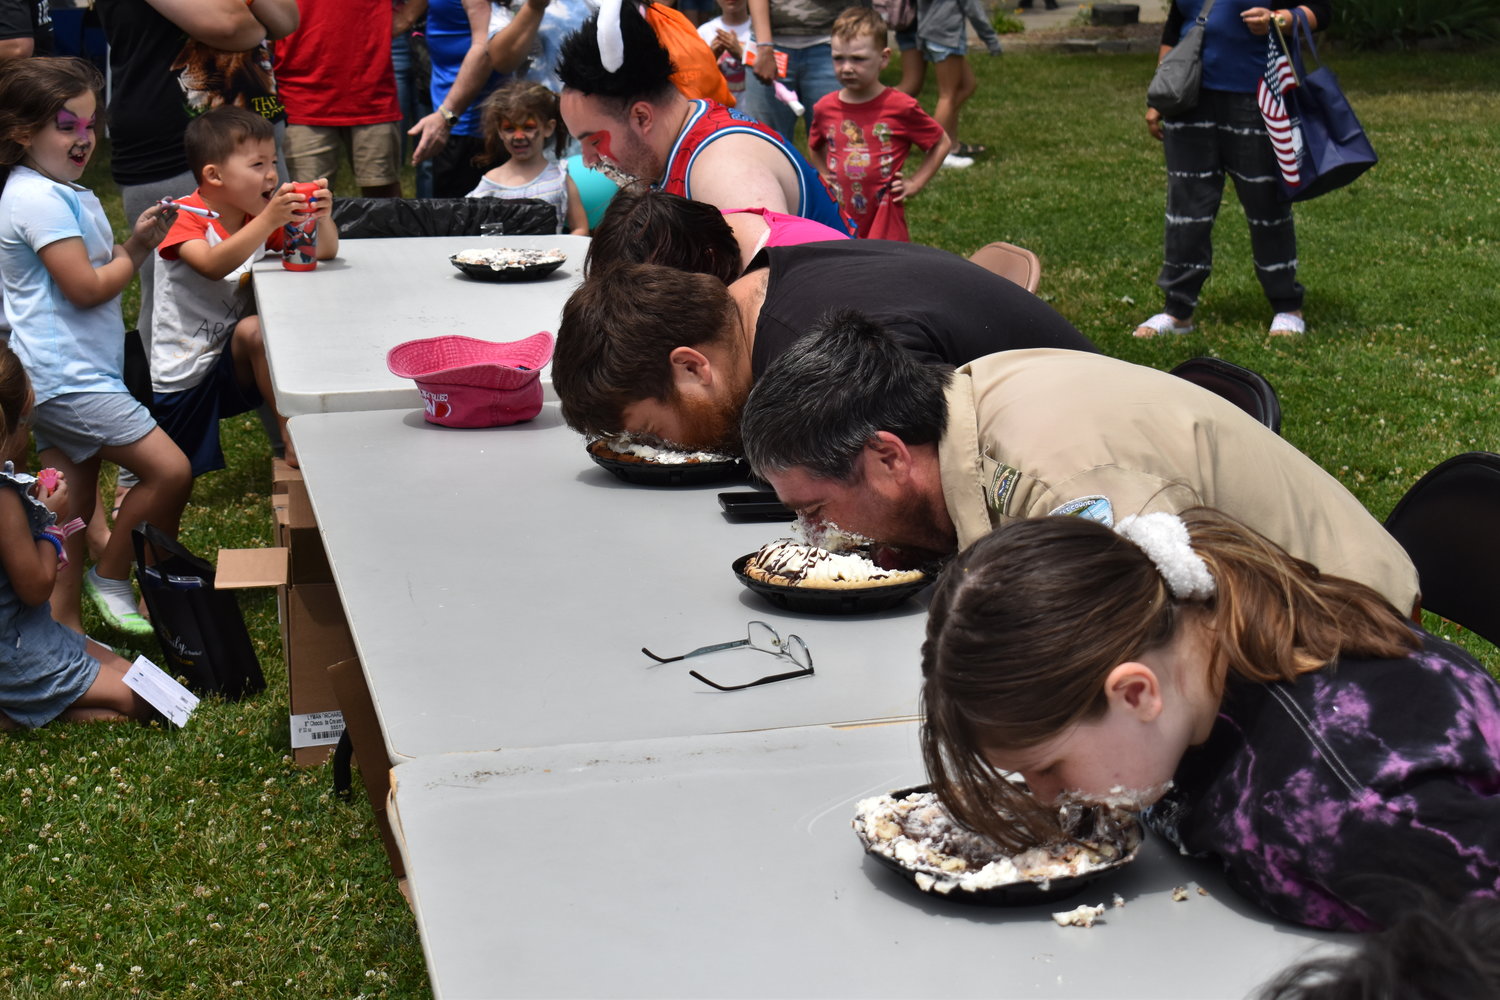 The pie eating contest, with pies donated by Stew Leonard’s in East Meadow, got the crowd all excited.